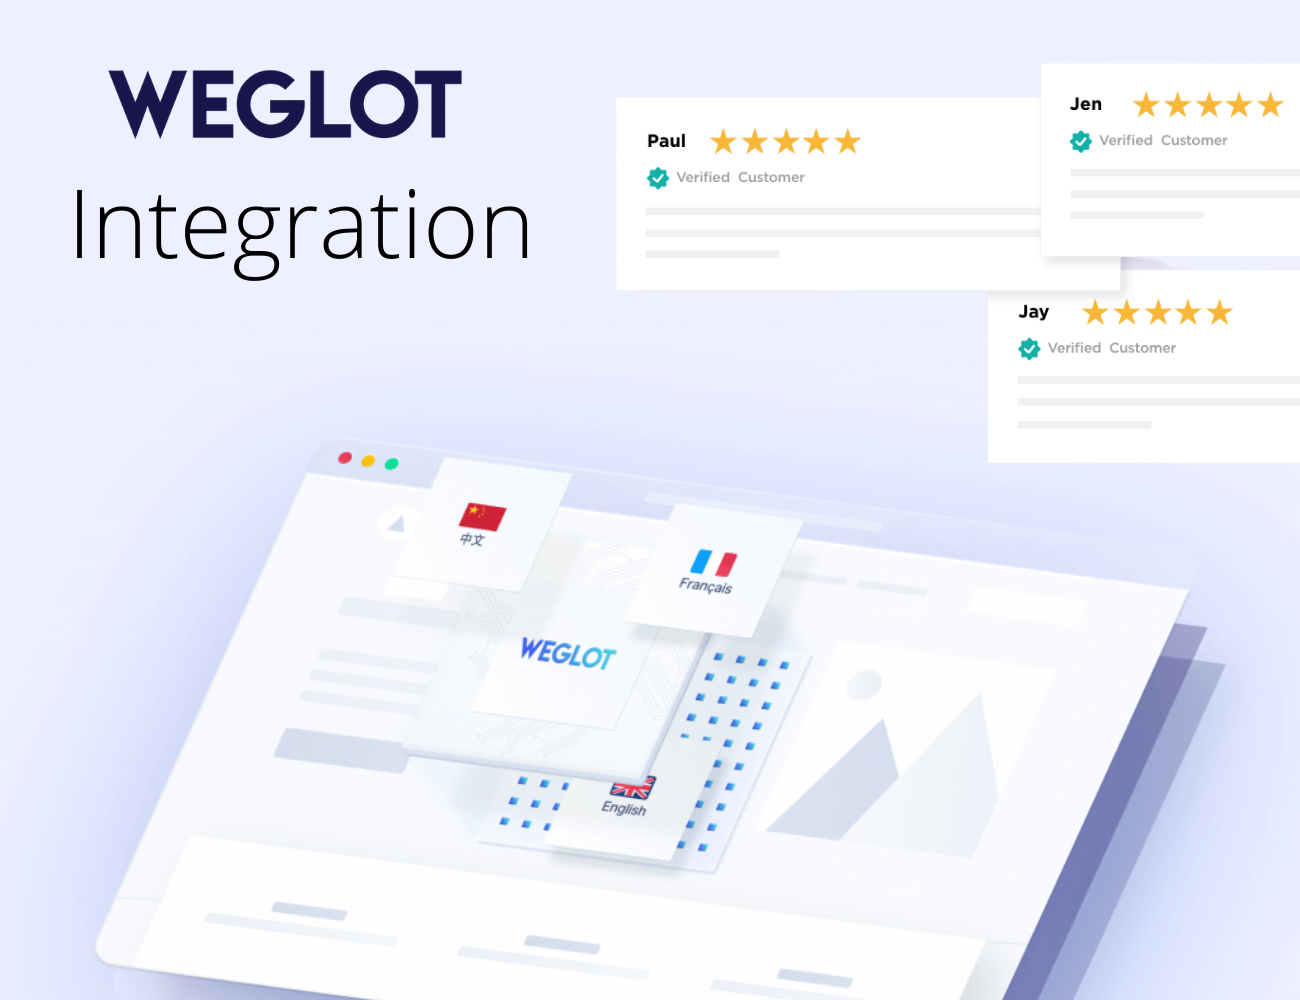 Make Review Content Multilingual With Our New Weglot Integration